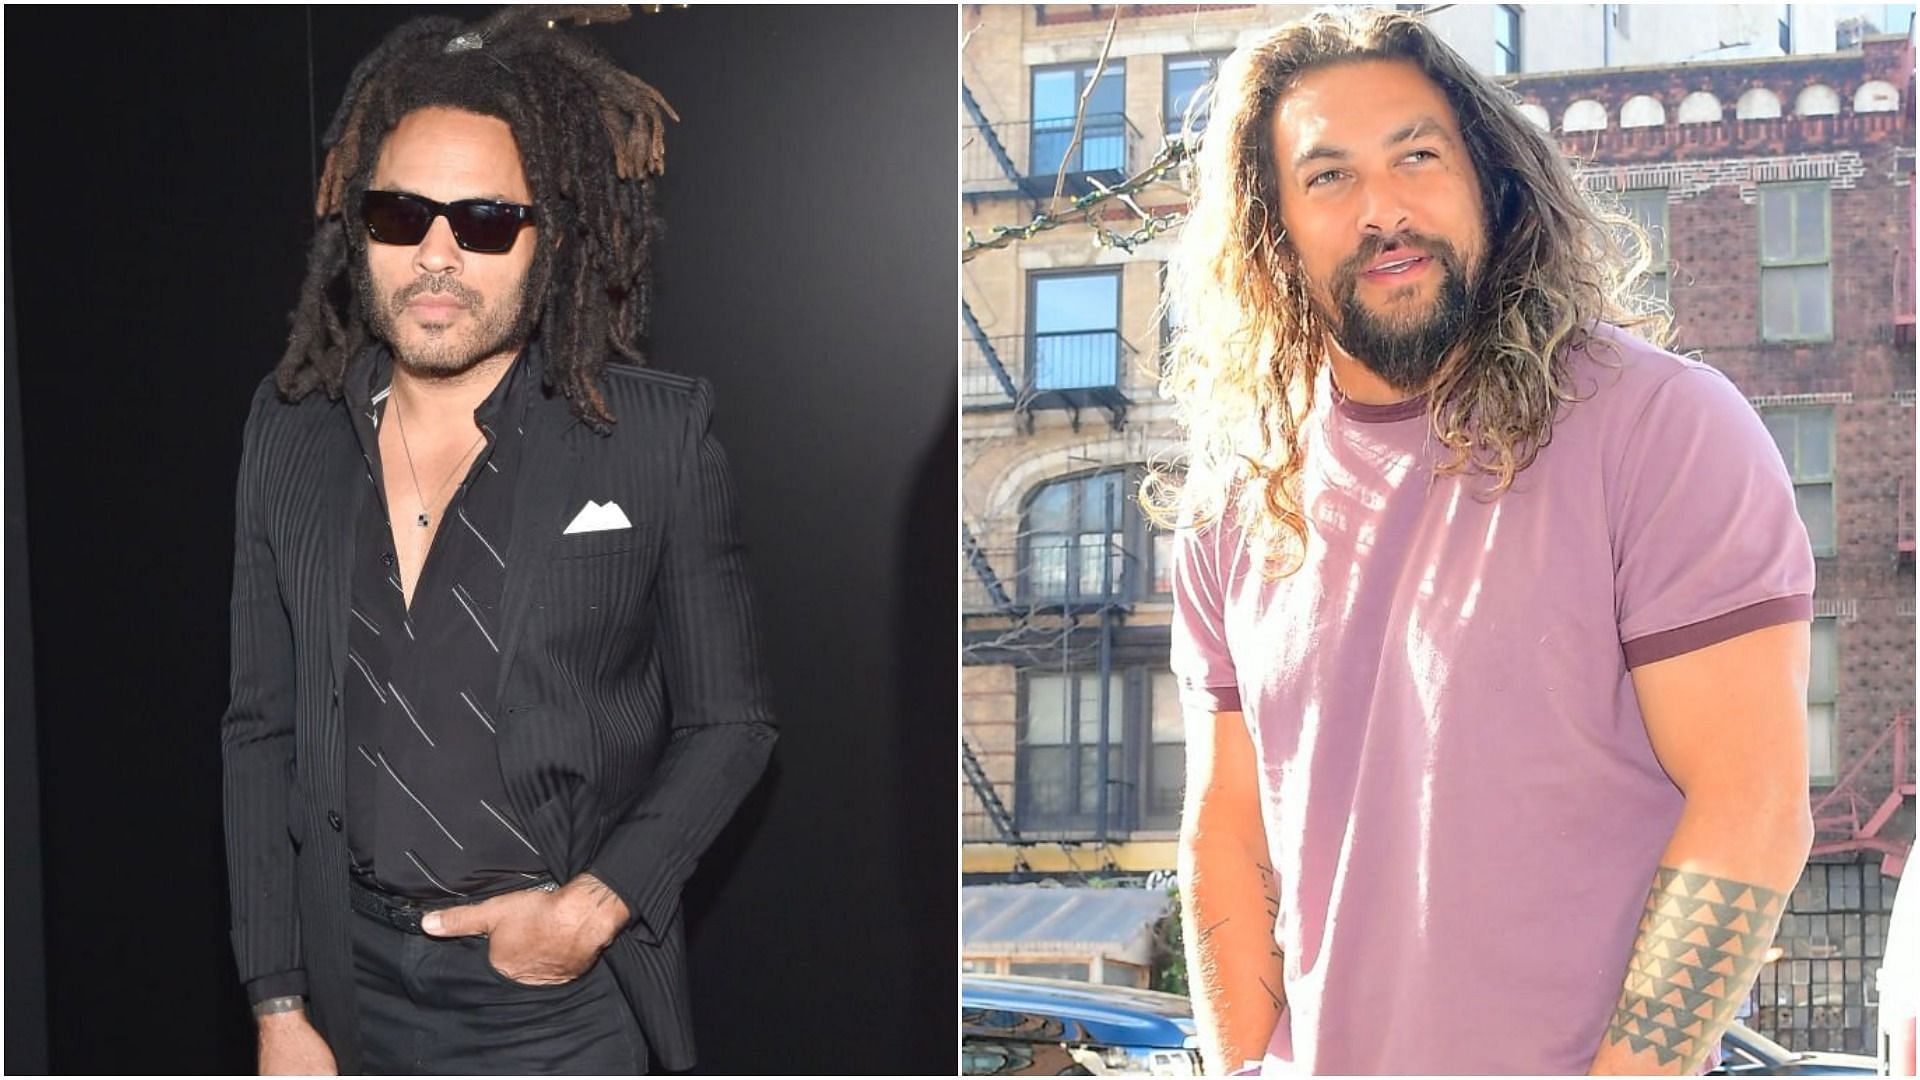 Lenny Kravitz recently shared a picture with Jason Momoa on Instagram (Images via Stephanie Cardinale and Raymond Hall/Getty Images)